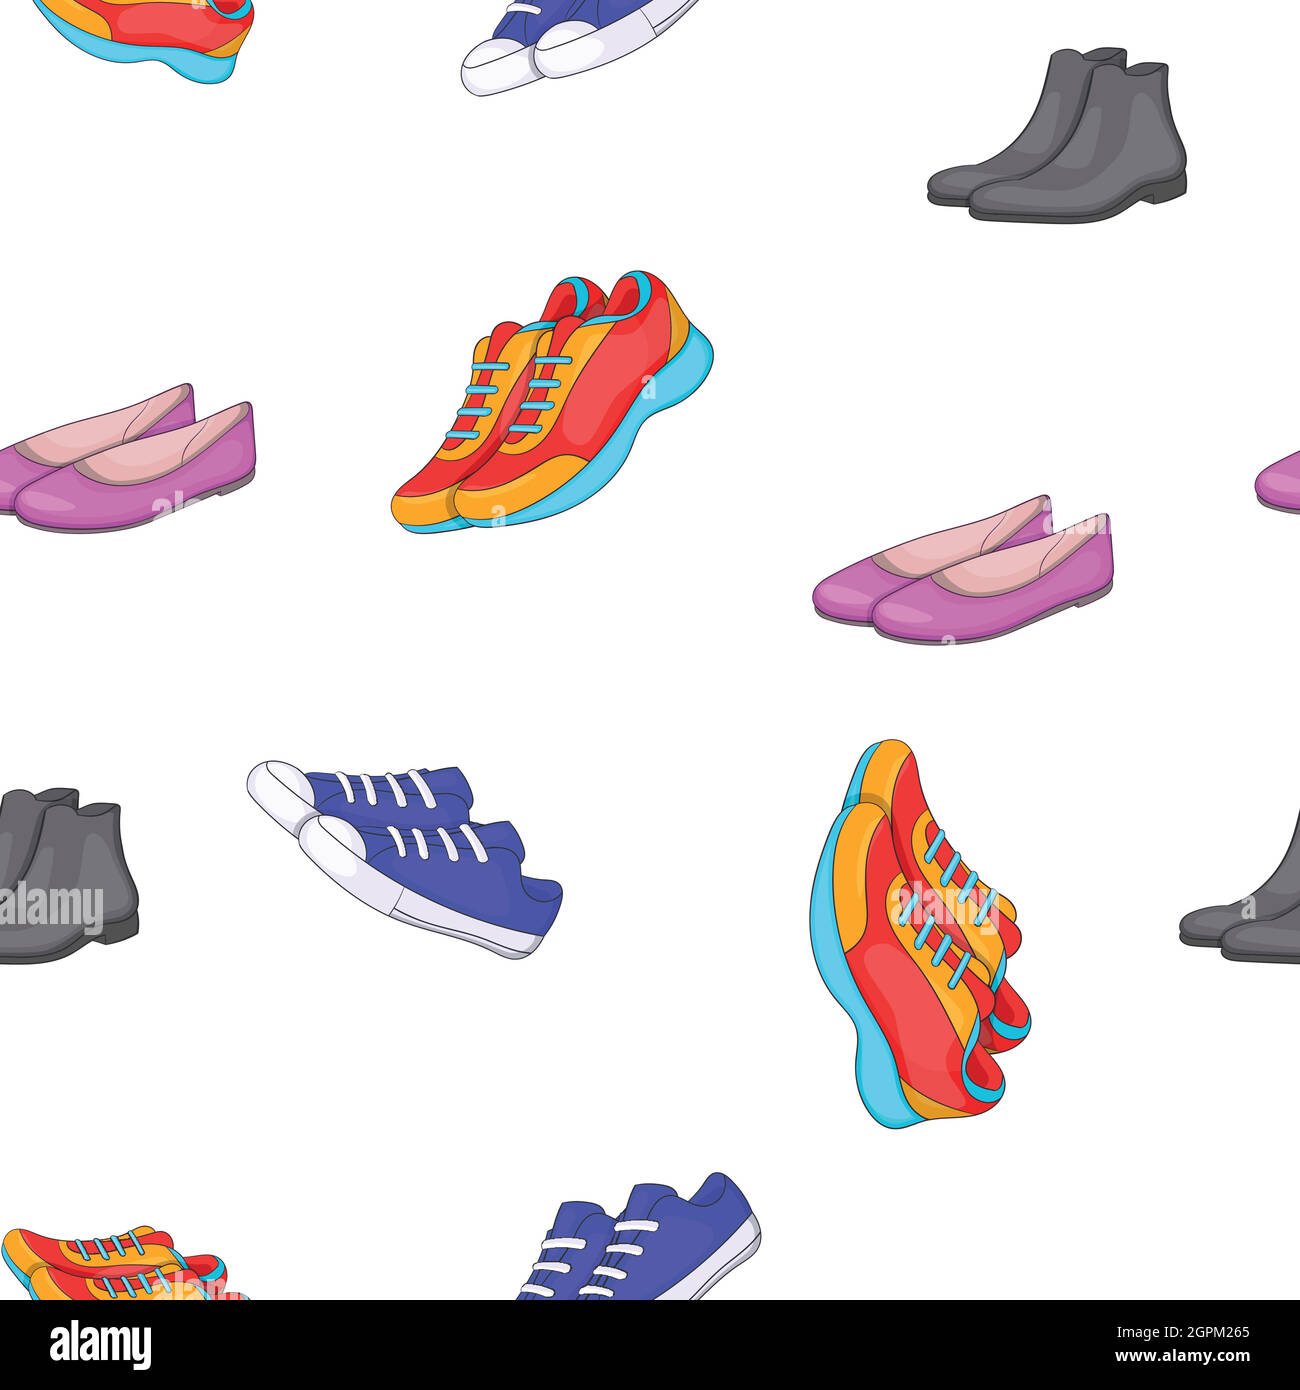 Shoes for man and woman pattern, cartoon style Stock Vector